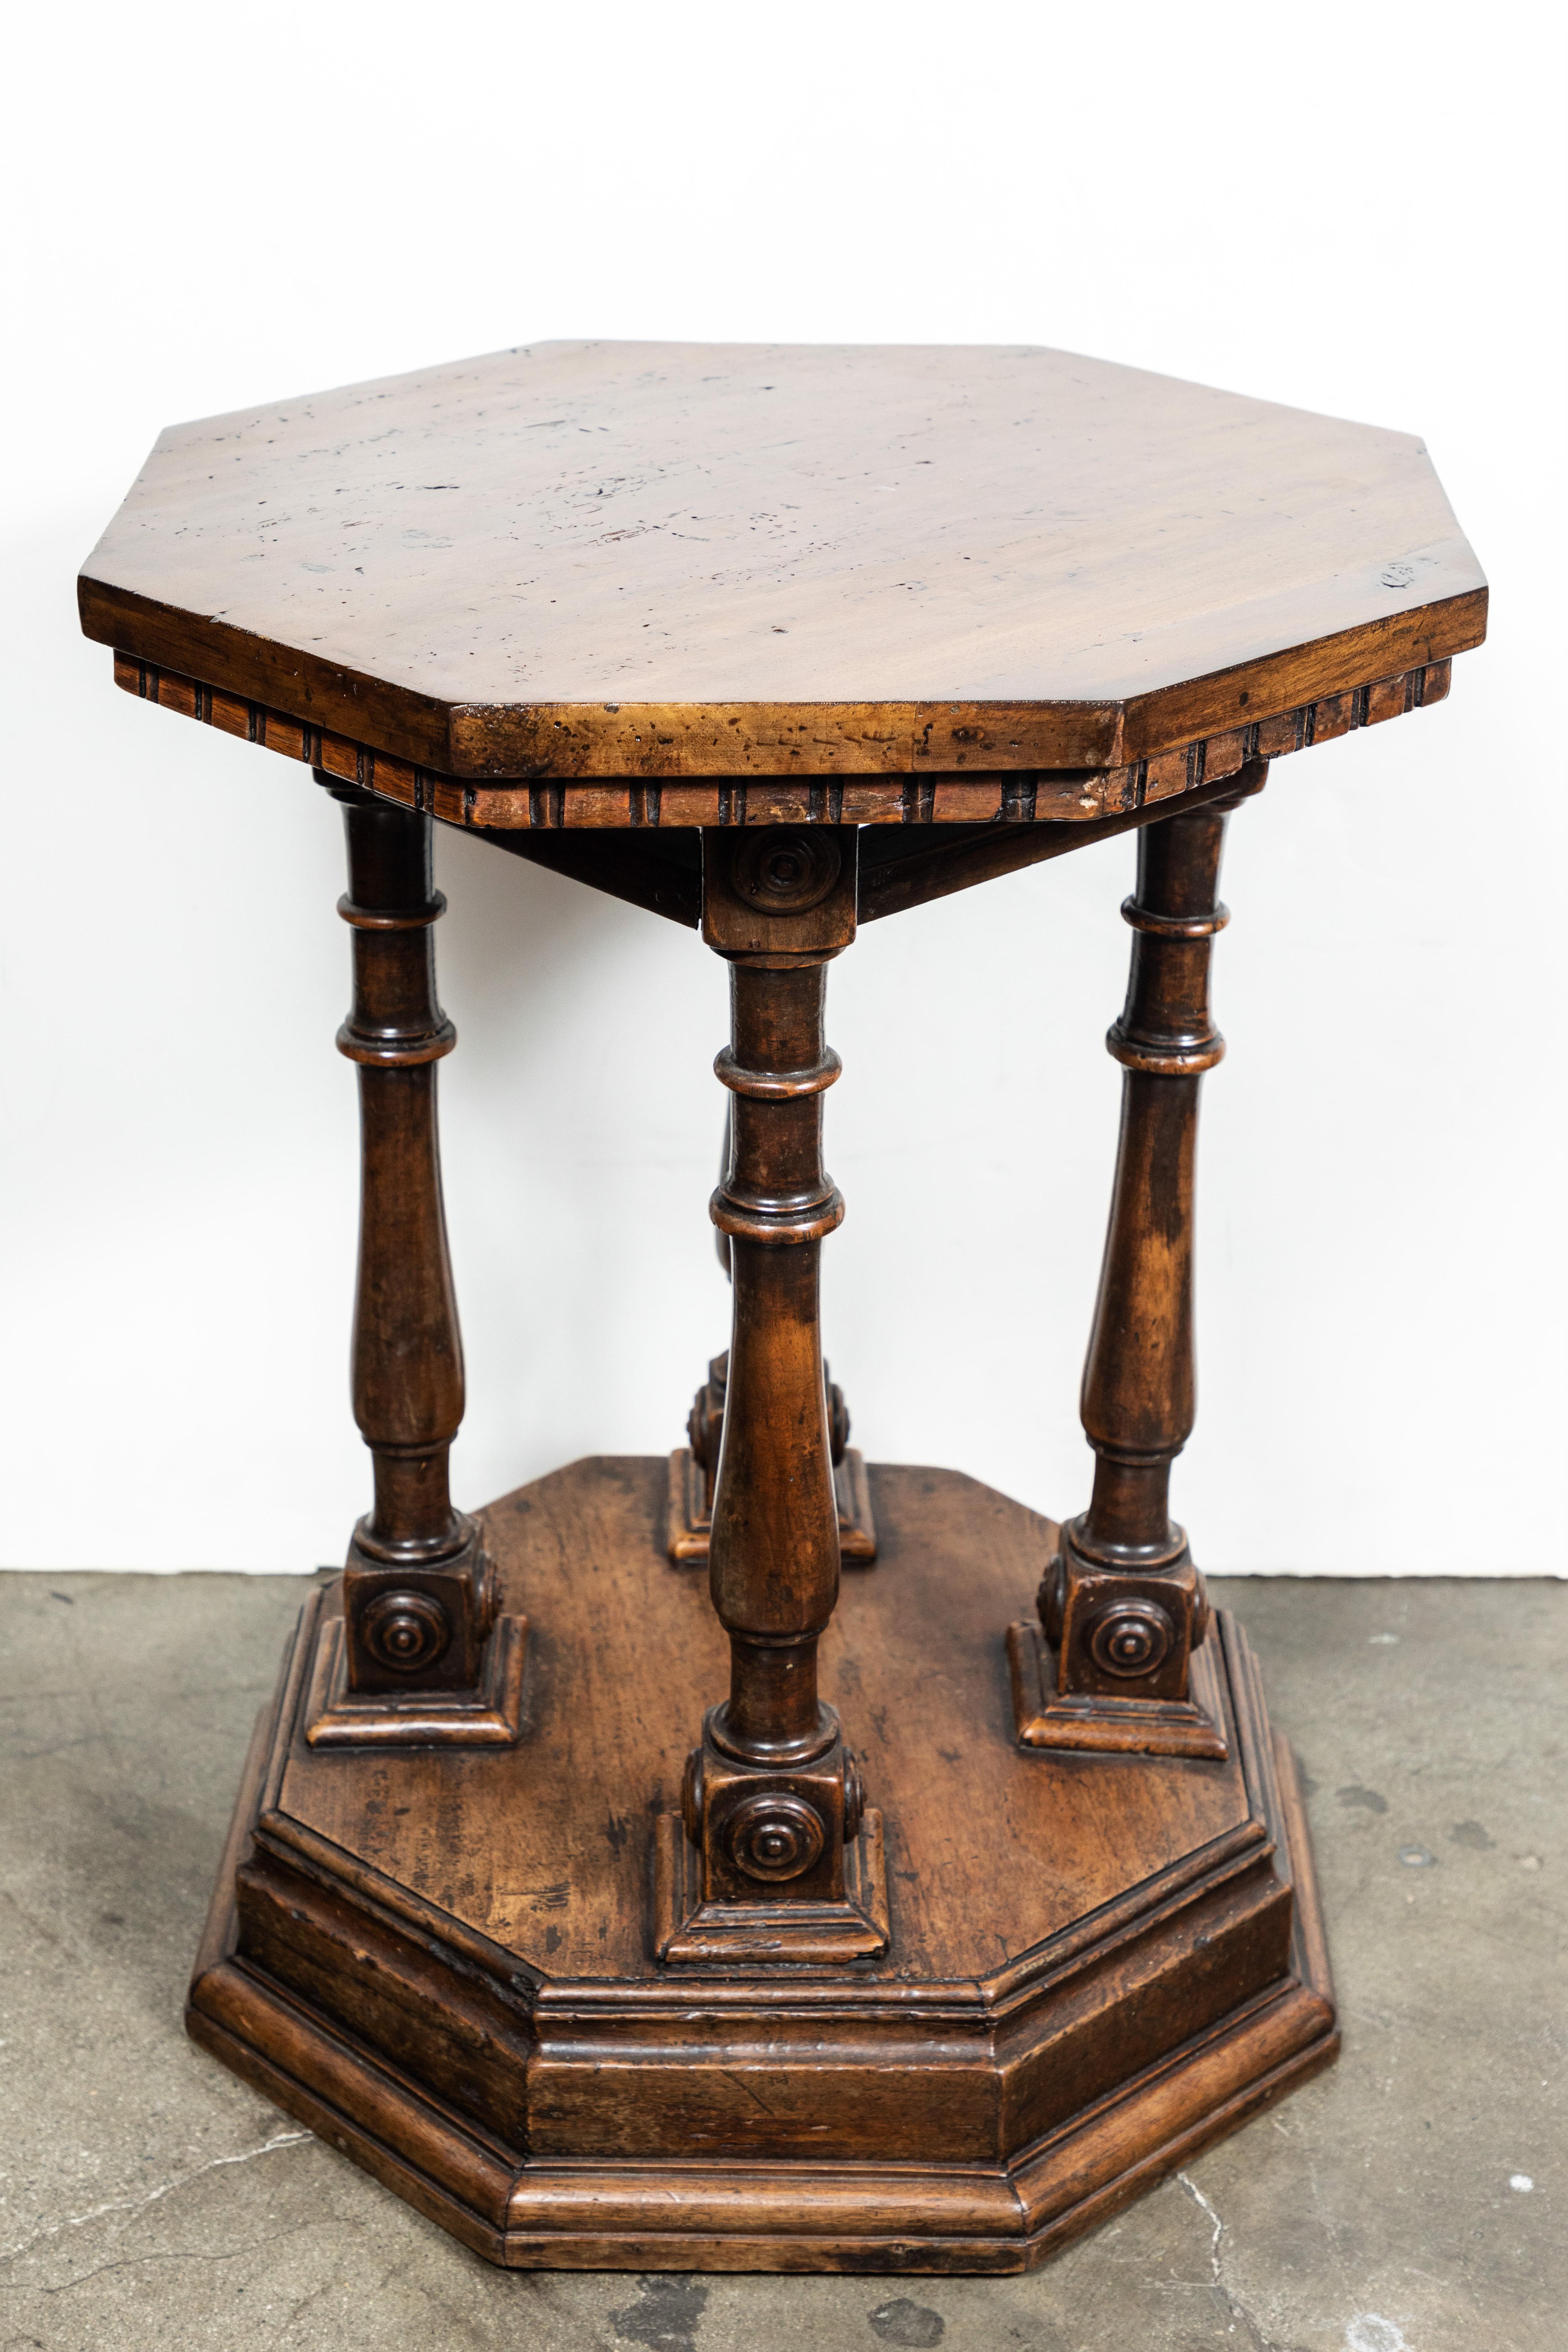 Carved Tuscan, Octagonal Side Table, circa 1900